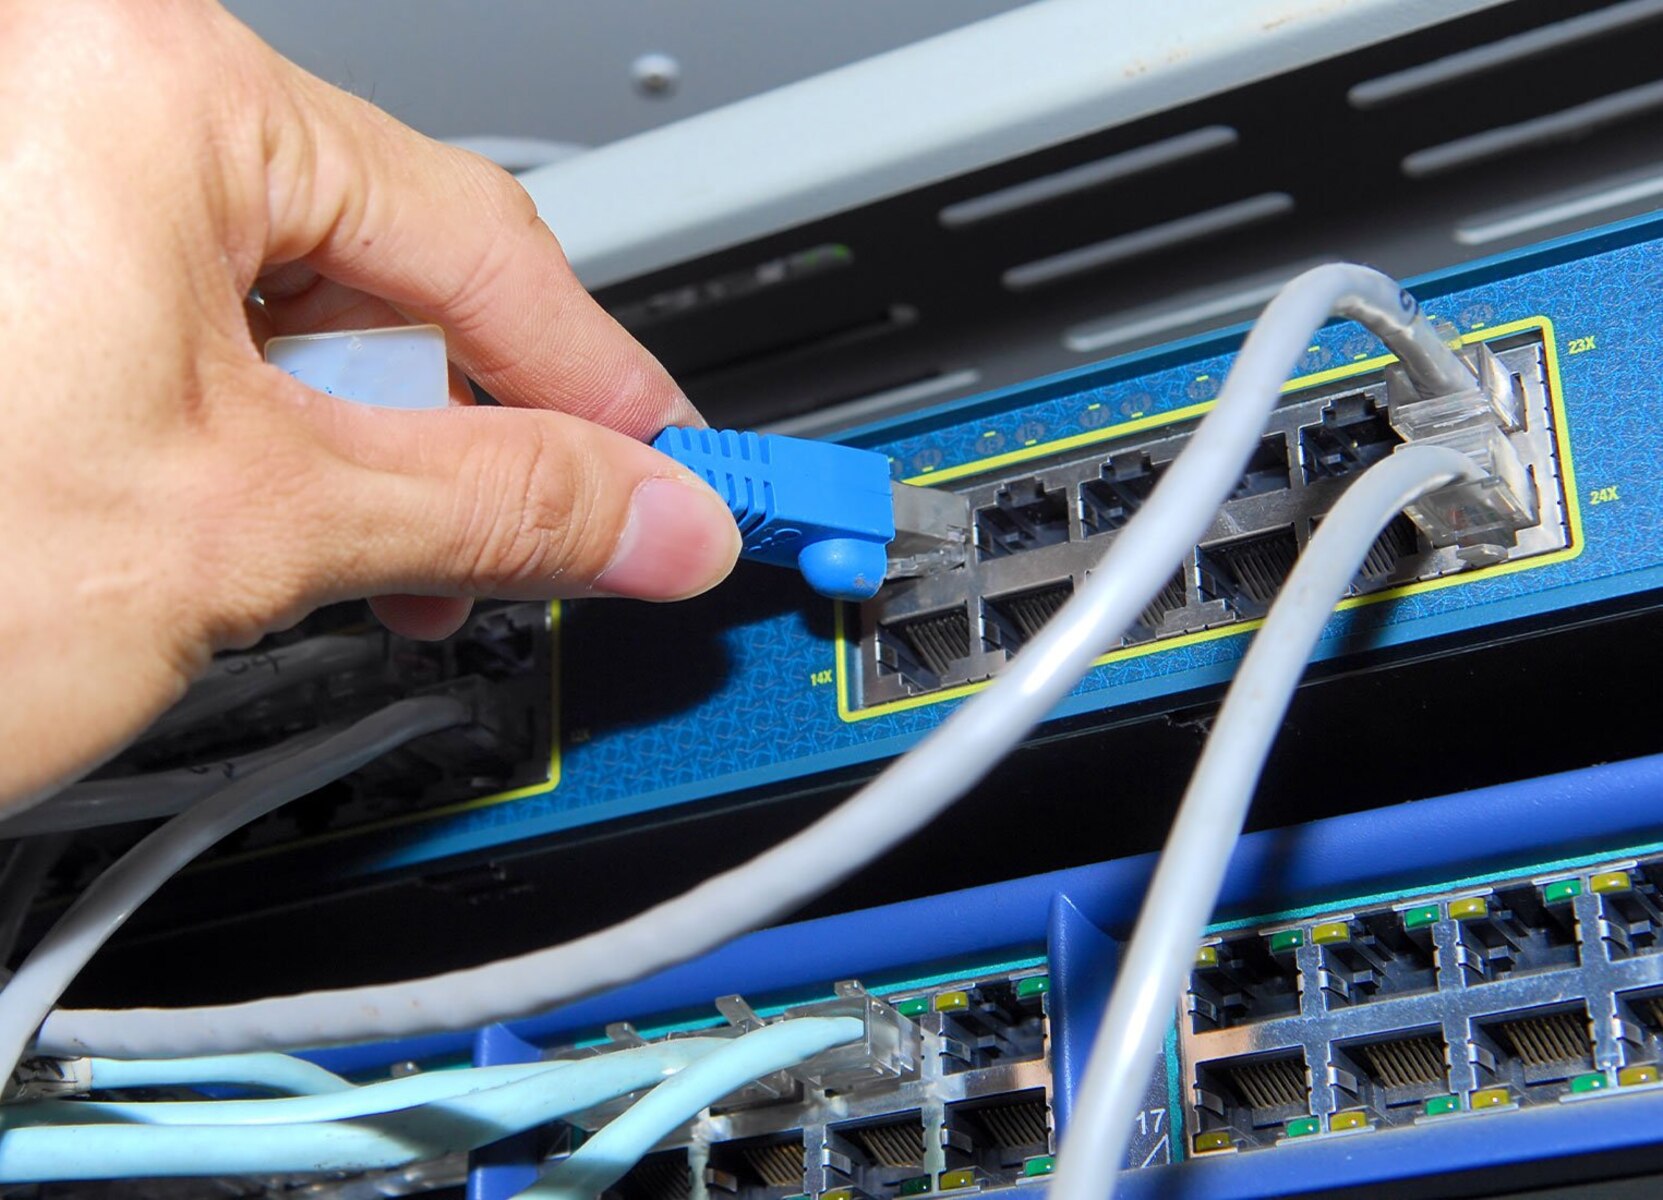 How To Hook Up A Network Switch